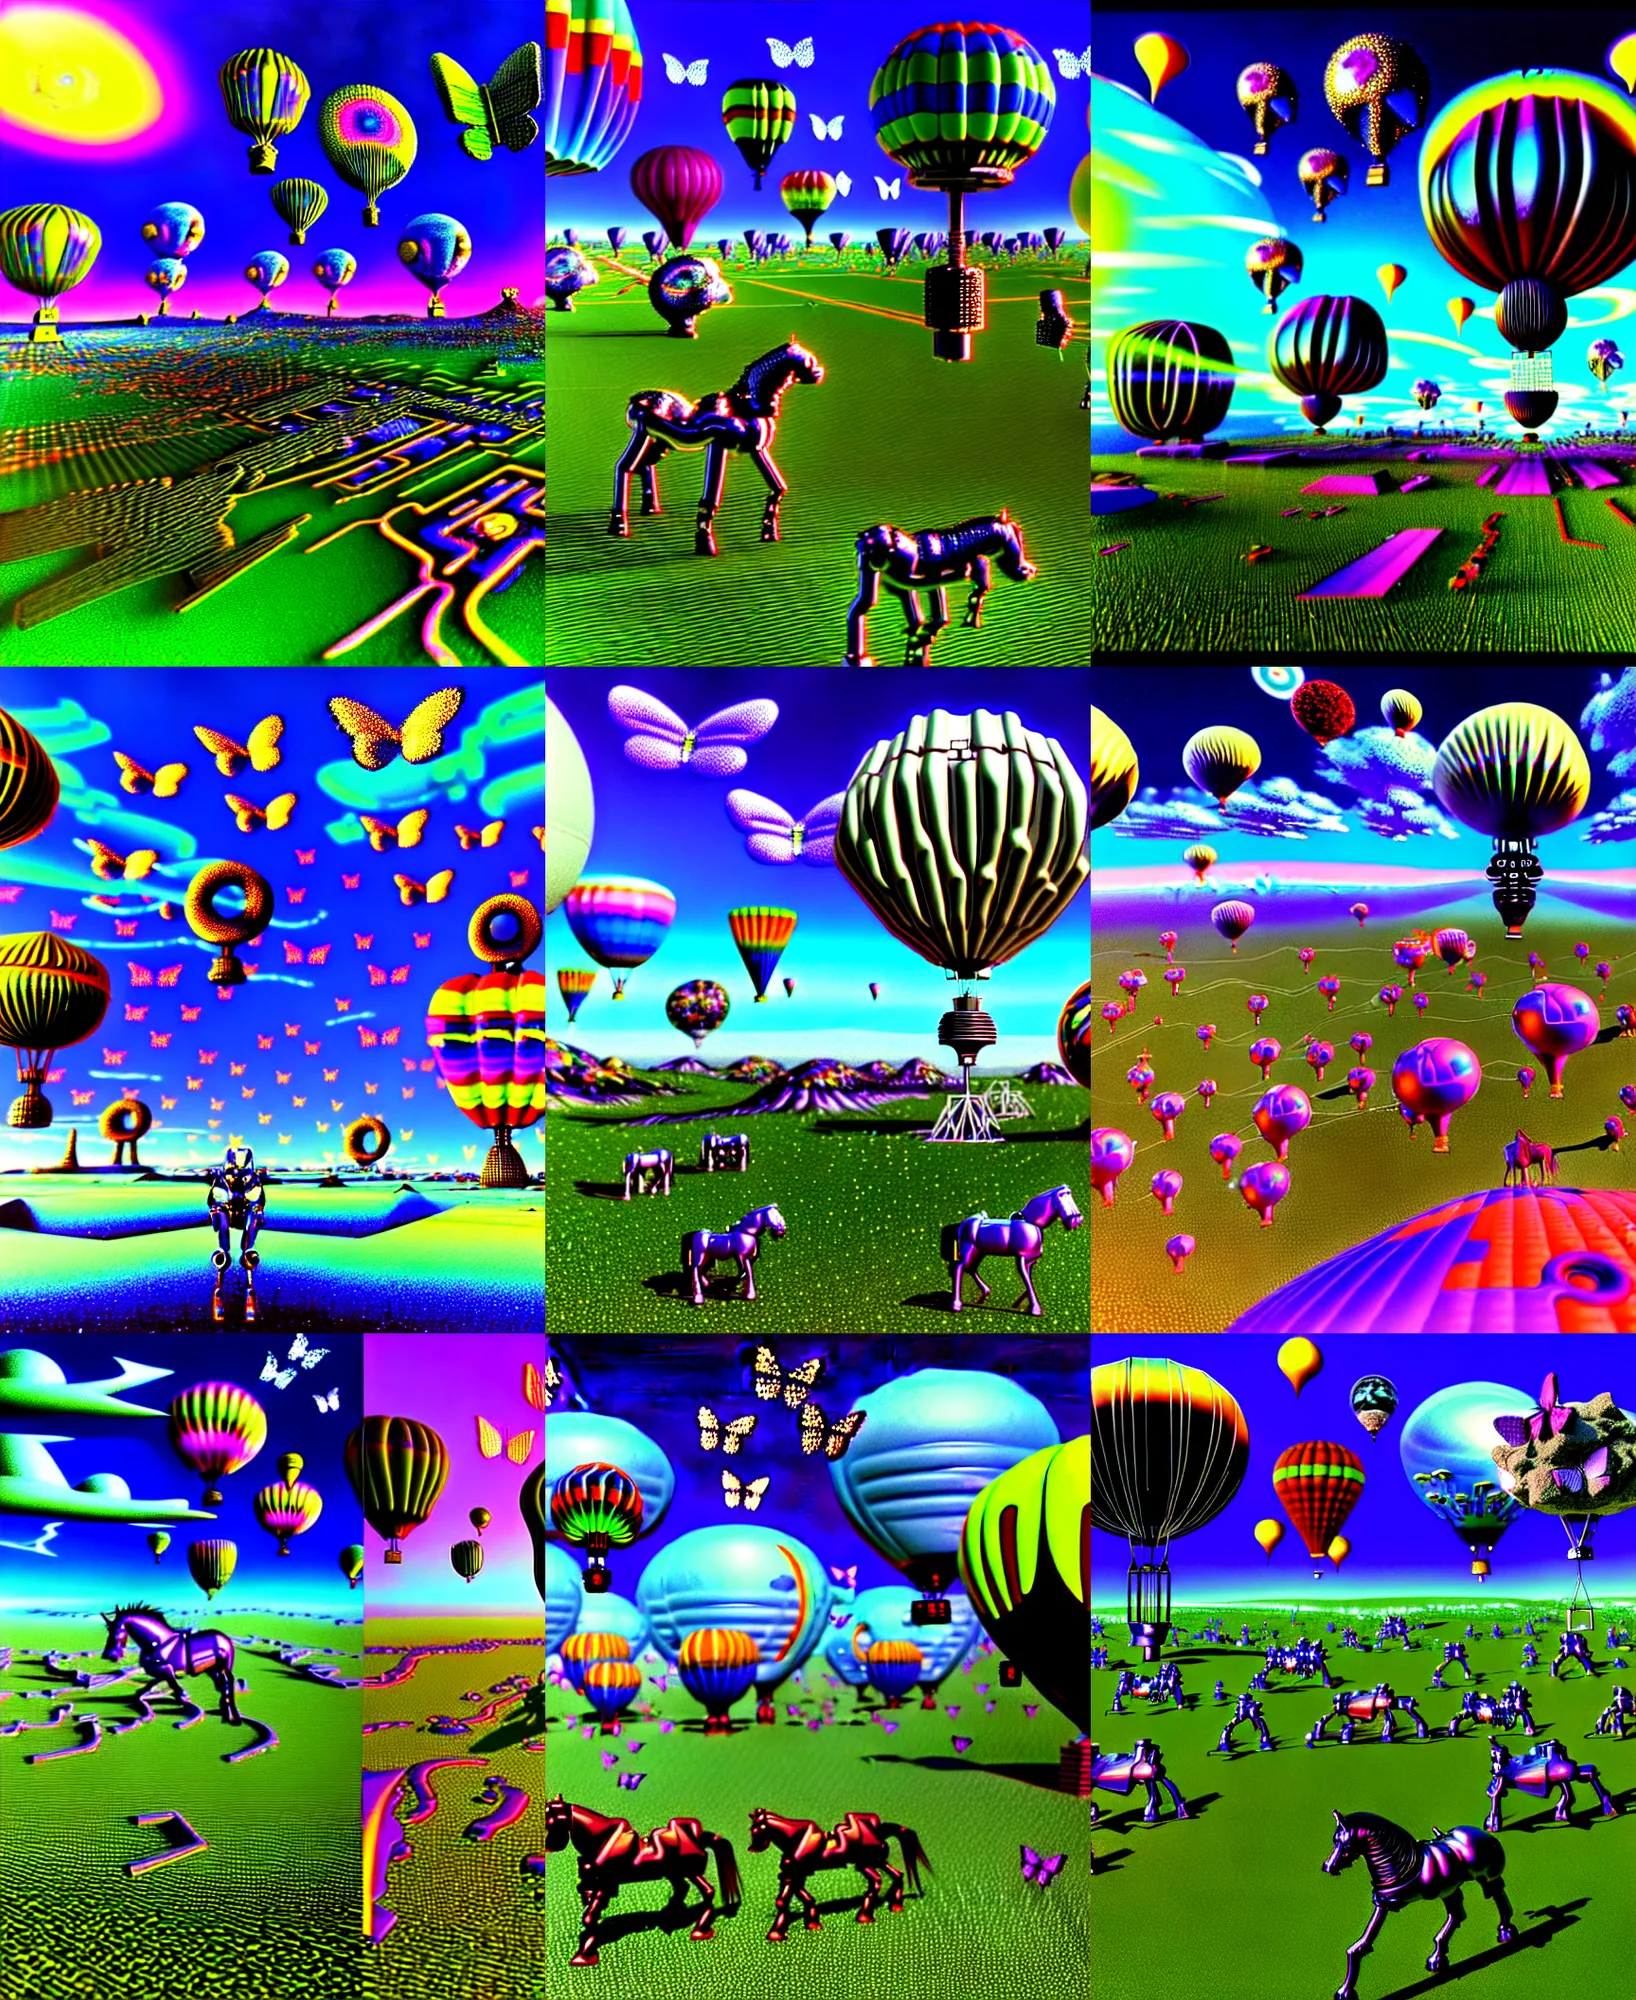 Prompt: 3 d render of cybernetic landscape with cyborg horses and hot air balloons with angel wings against a psychedelic surreal background with 3 d butterflies and 3 d flowers n the style of 1 9 9 0's demoscene cgi graphics, lsd dream emulator psx, 3 d rendered y 2 k aesthetic by ichiro tanida, 3 do magazine, wide shot